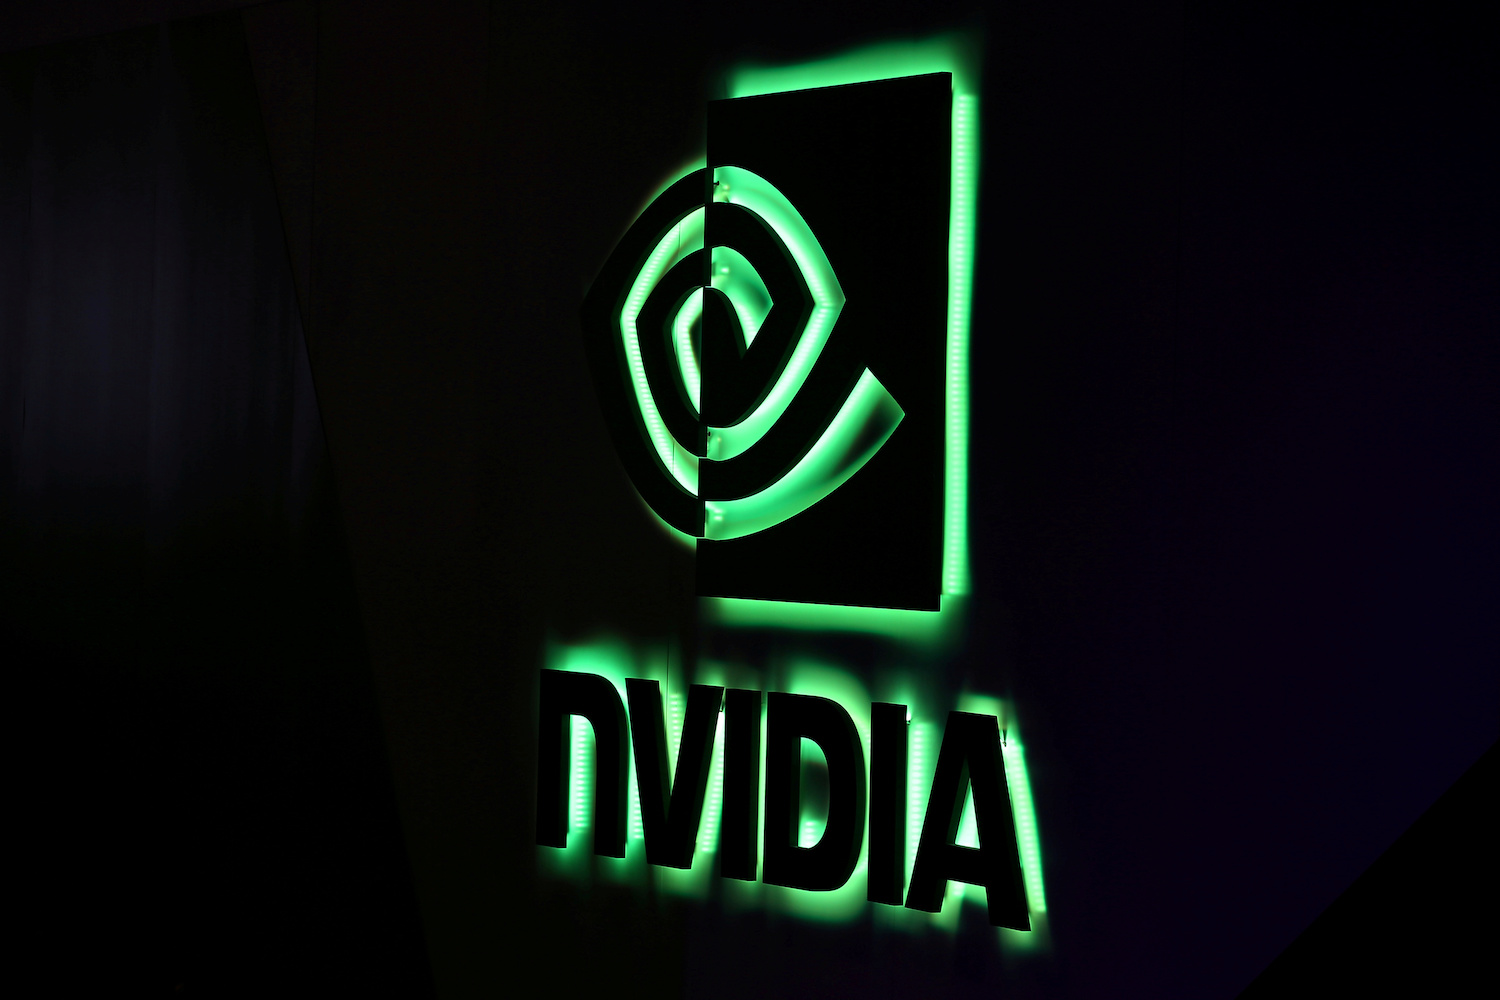 Nvidia could be a giant in the age of artificial intelligence